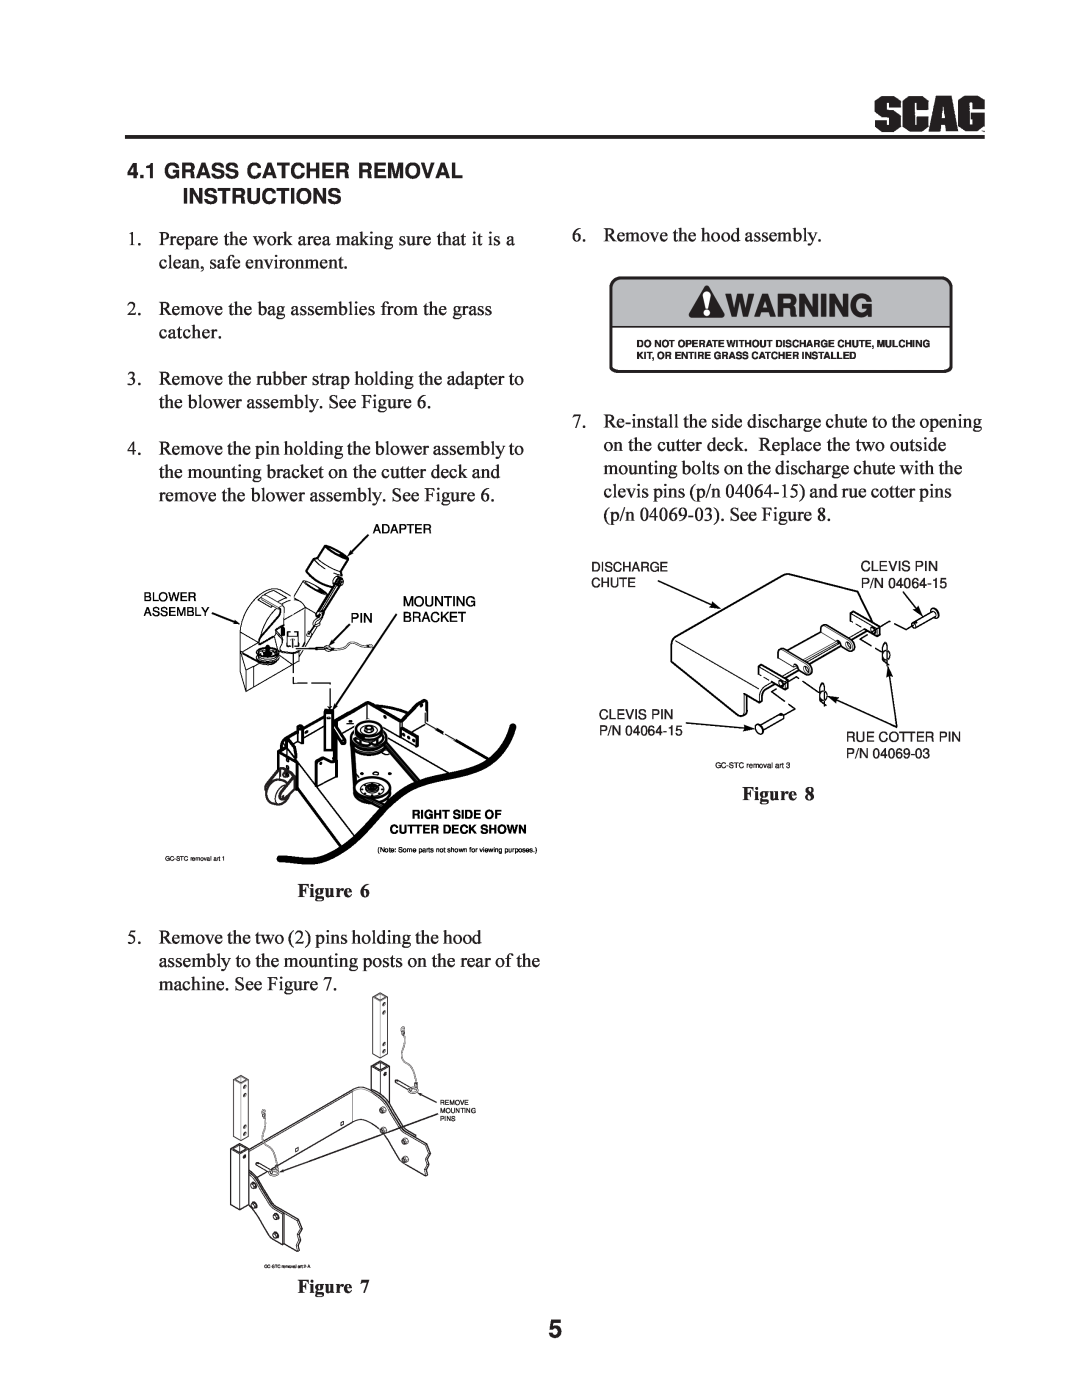 Scag Power Equipment GC-STC manual Grass Catcher Removal Instructions 